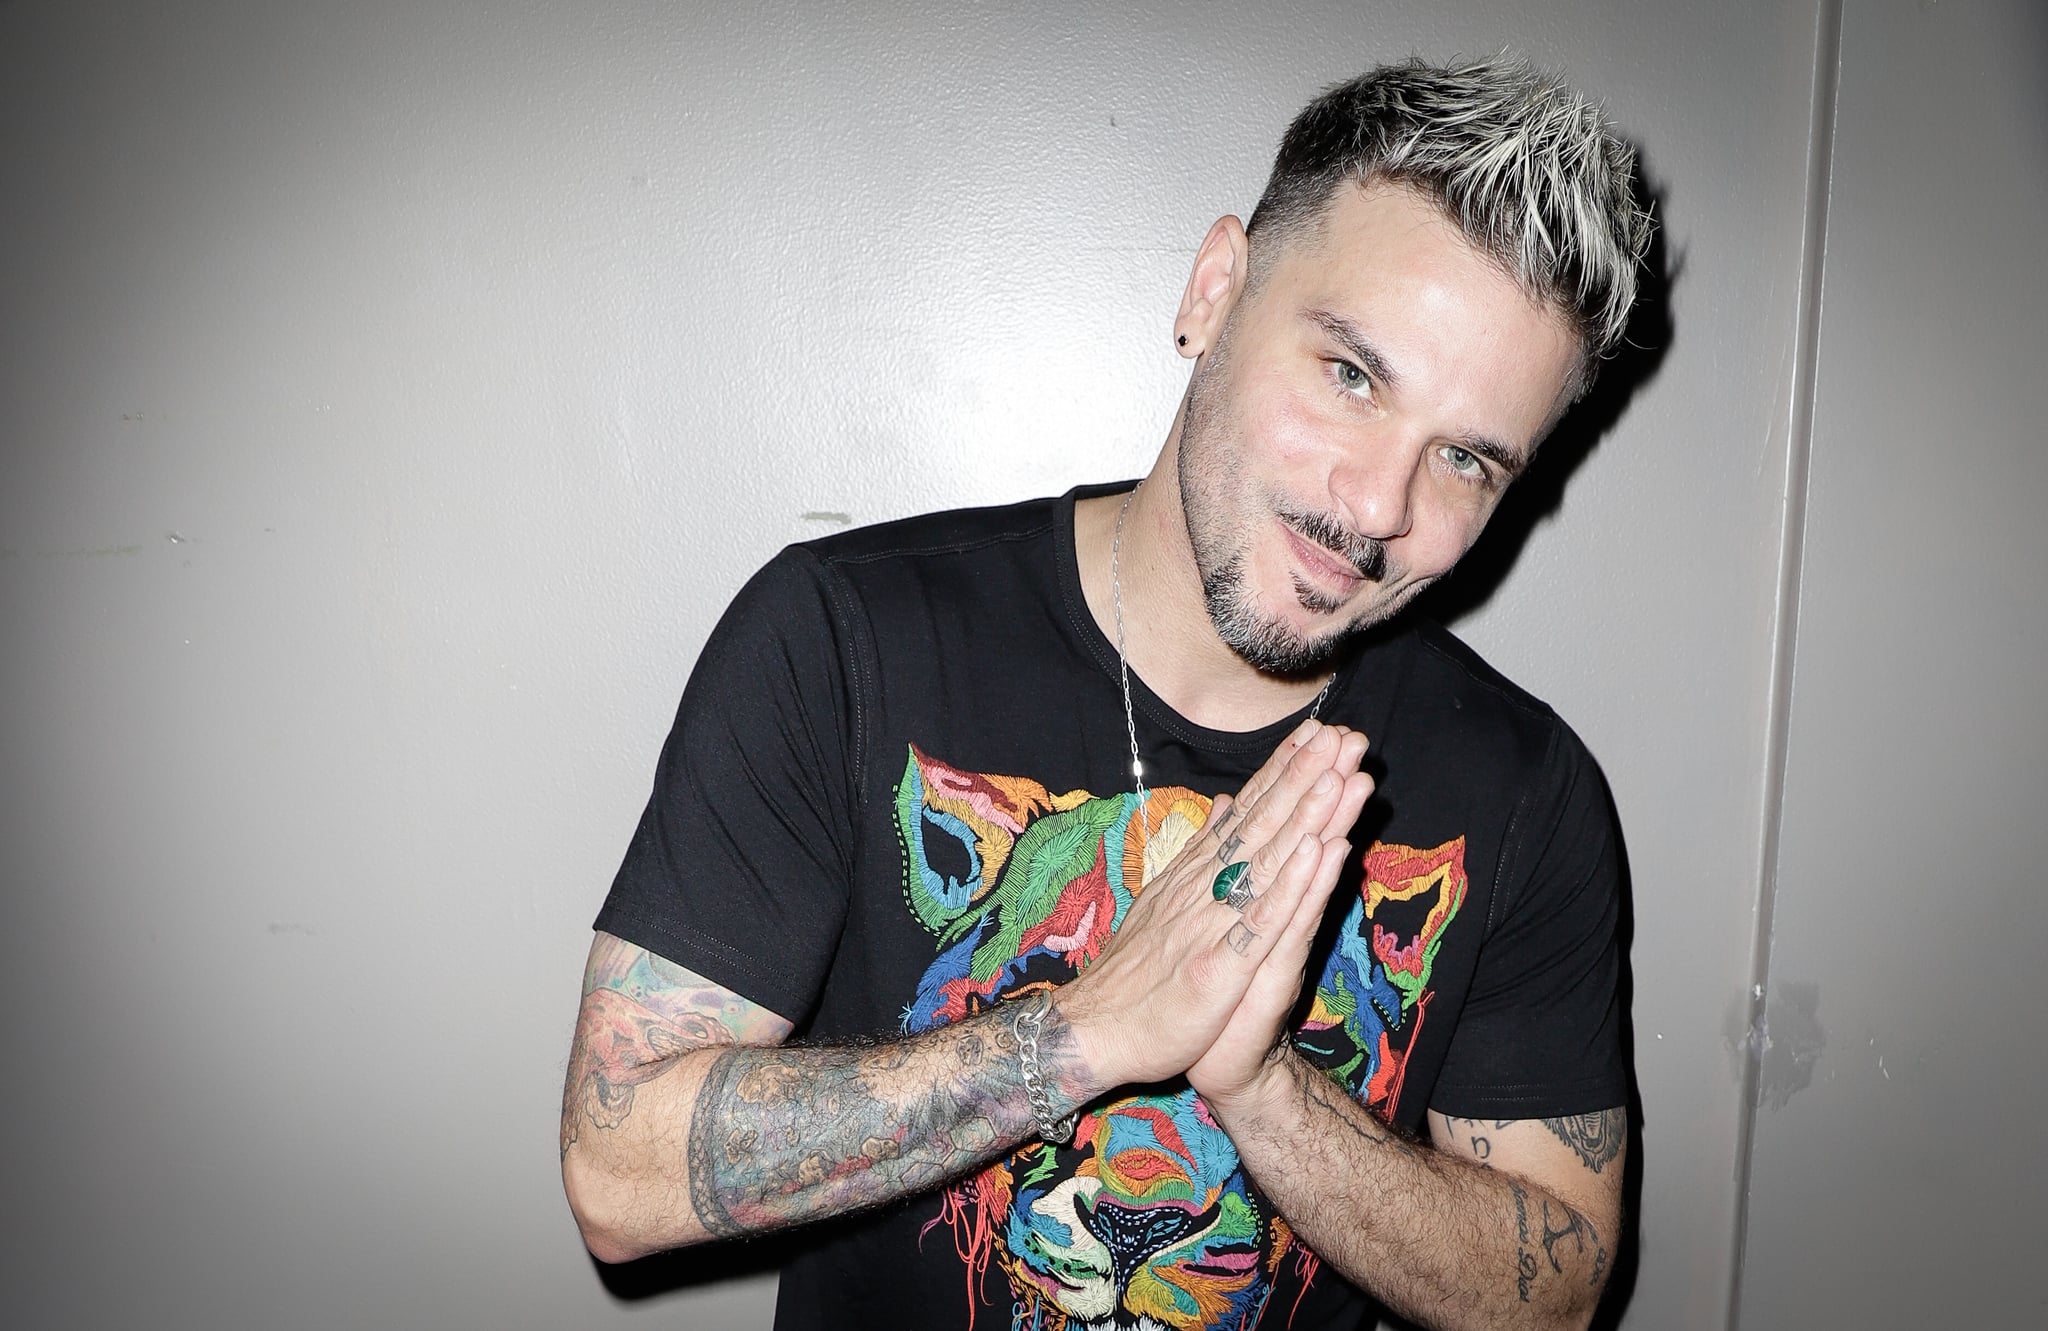 MIAMI BEACH, FL - MAY 24:  Pedro Capo backstage during his Calma tour opener in Miami at the Fillmore Jackie Gleason Theatre on May 24, 2019 in Miami Beach, Florida.  (Photo by John Parra/Getty Images)